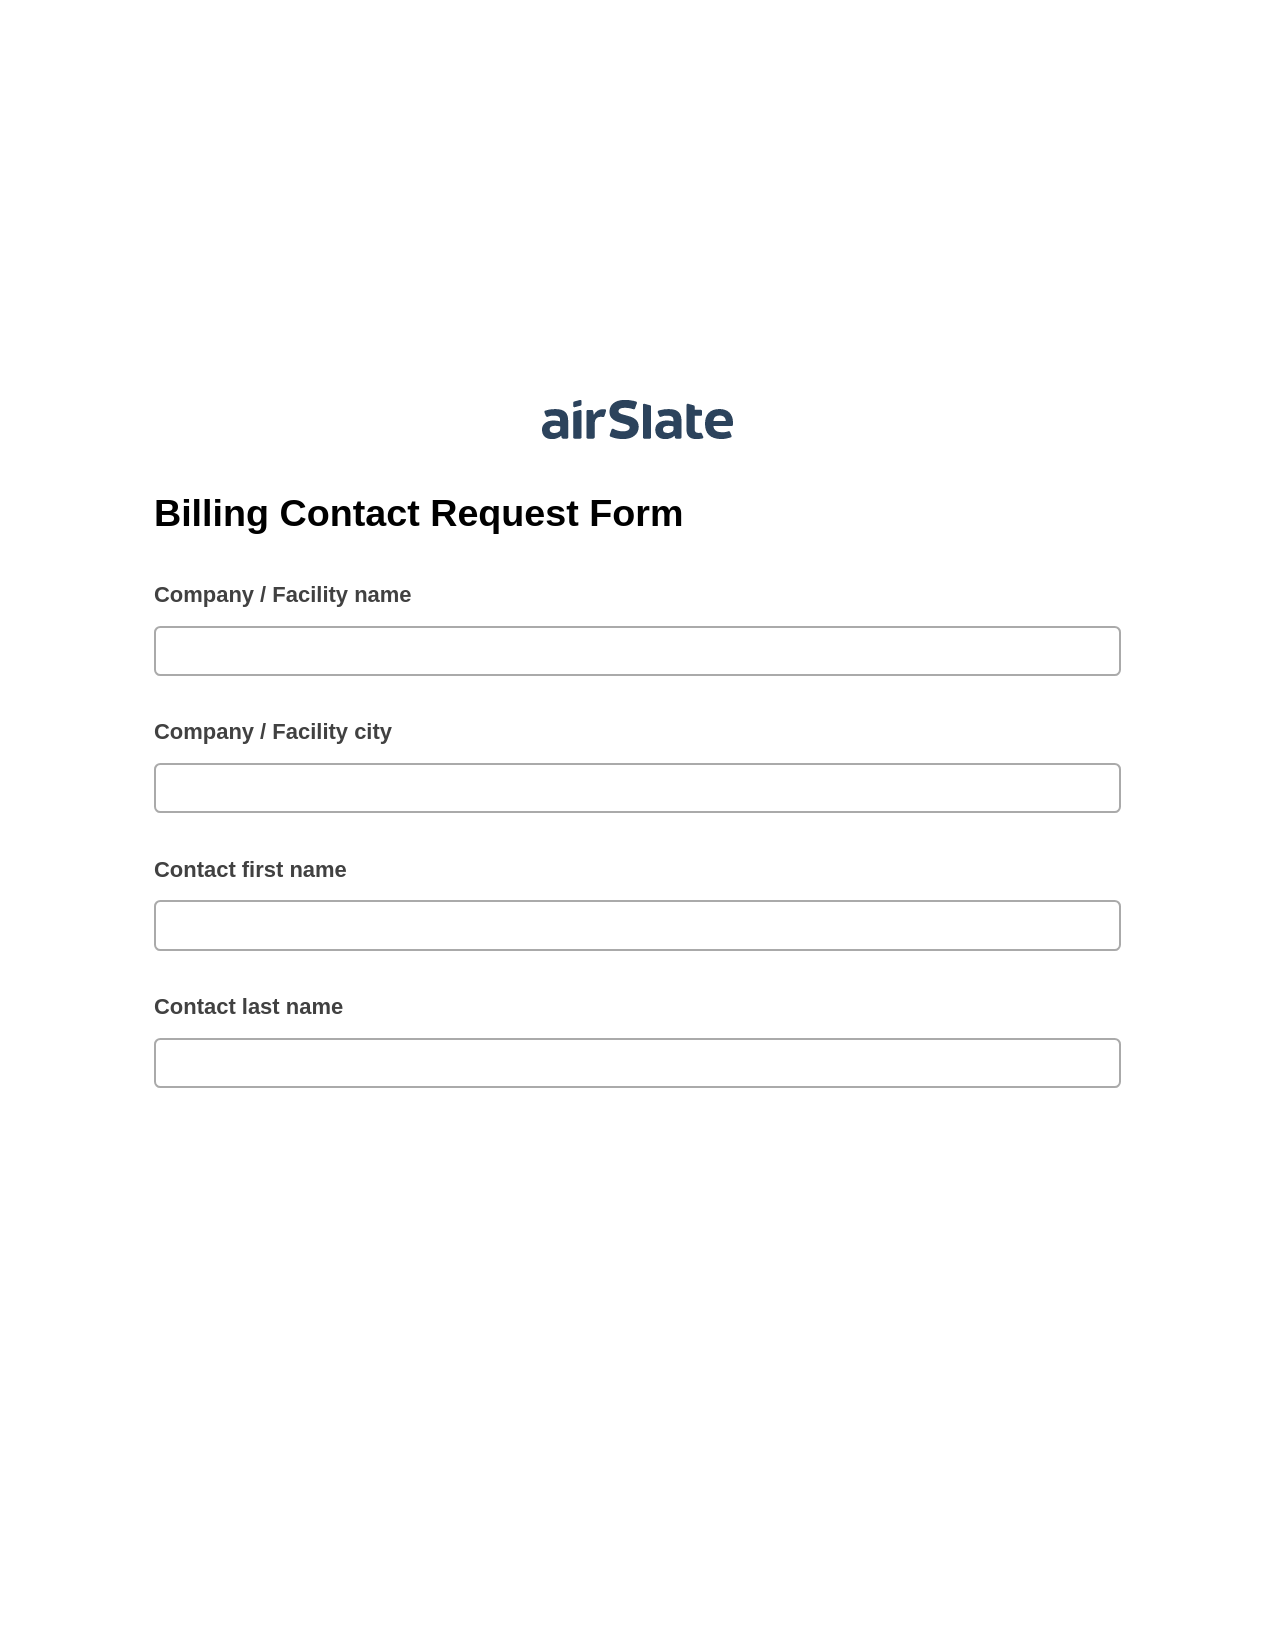 Multirole Billing Contact Request Form Pre-fill from NetSuite Records Bot, Google Calendar Bot, Email Notification Postfinish Bot